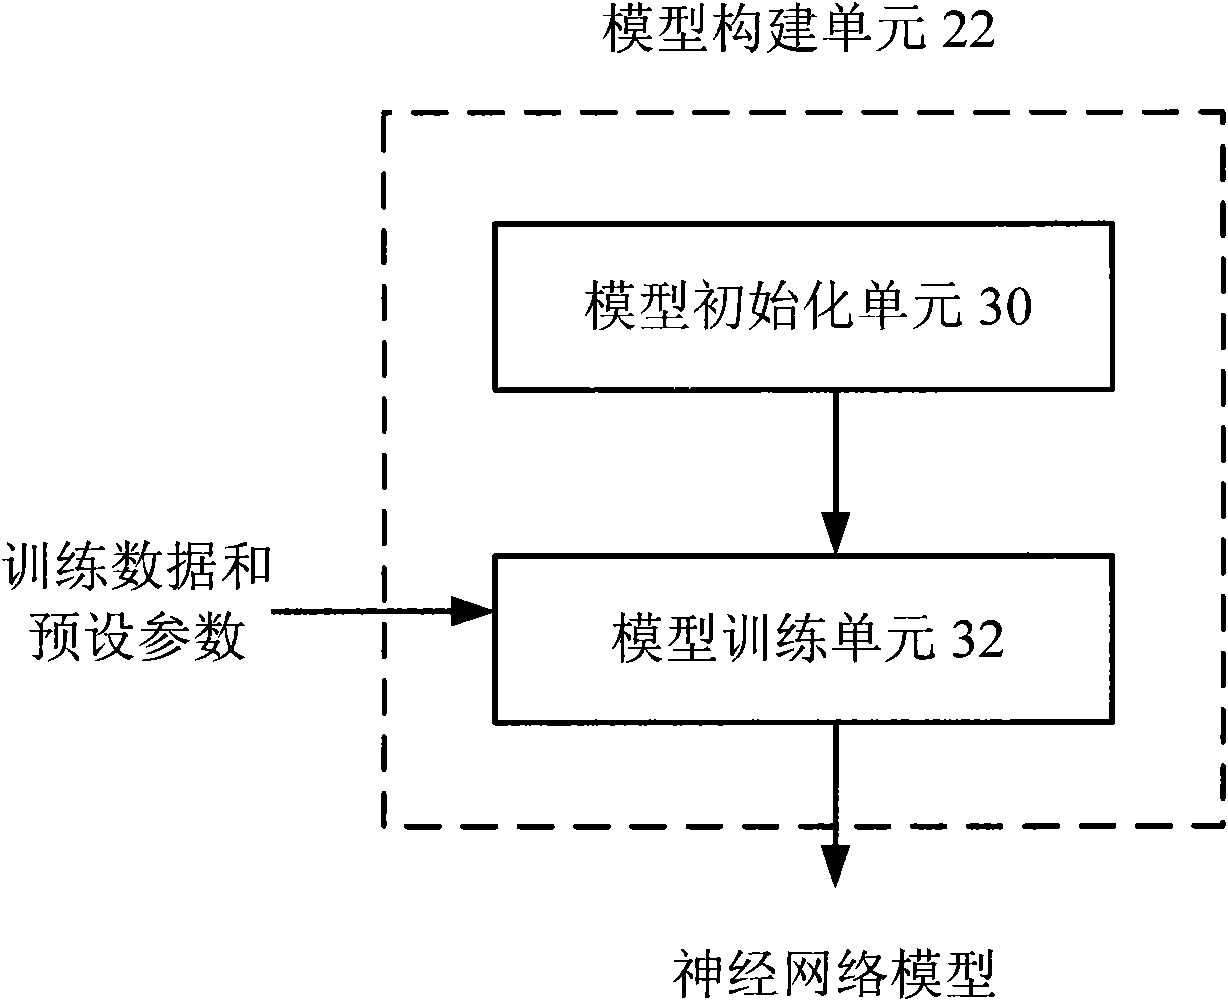 Traffic state estimation device and method based on data fusion